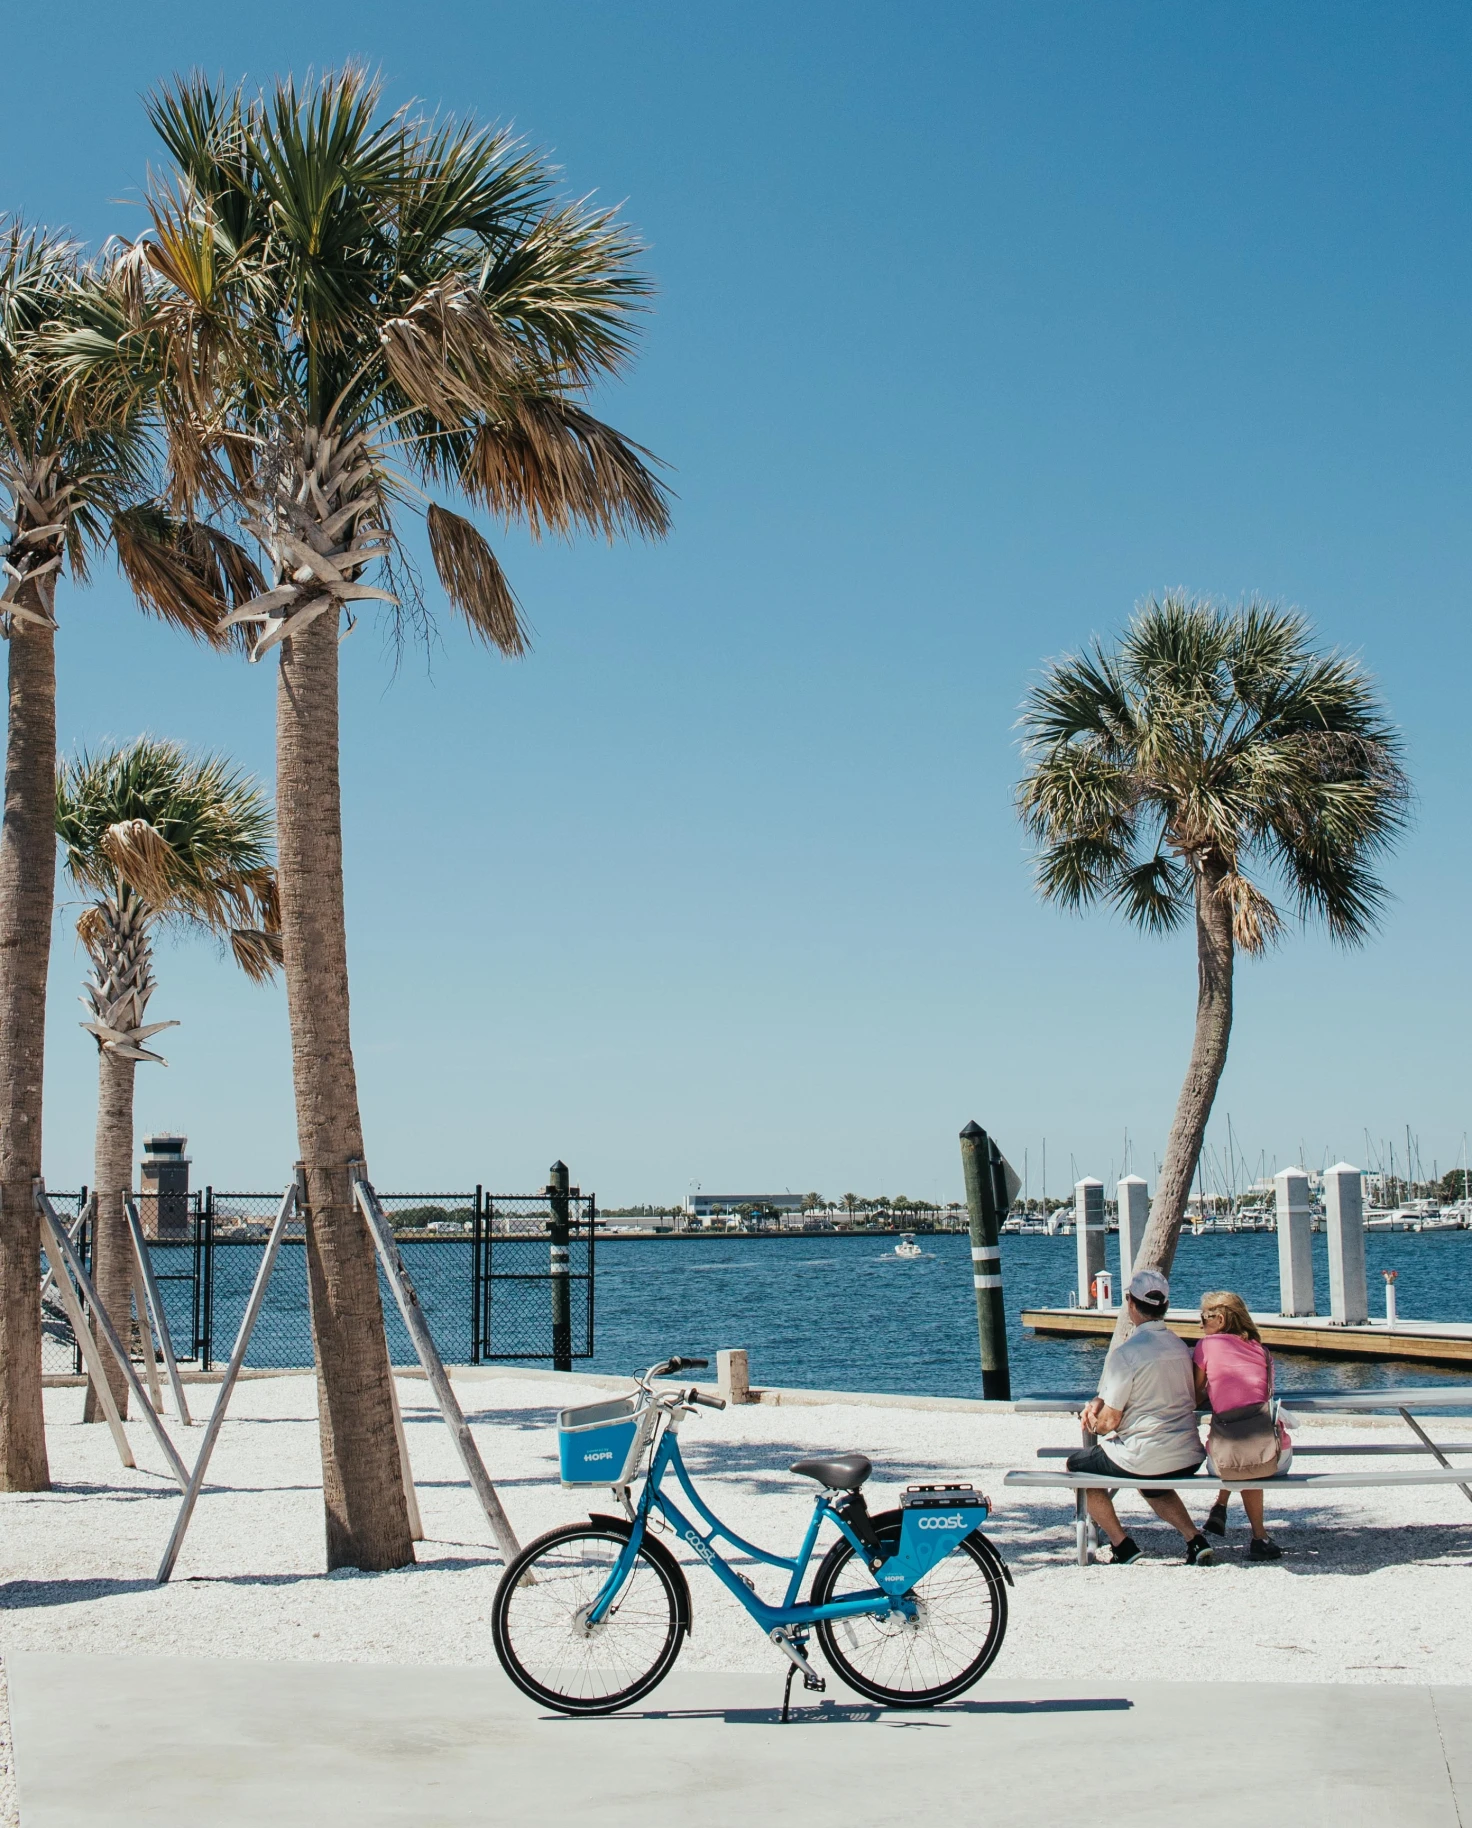 A picture of people on a boardwalk next to palm trees in Tampa.